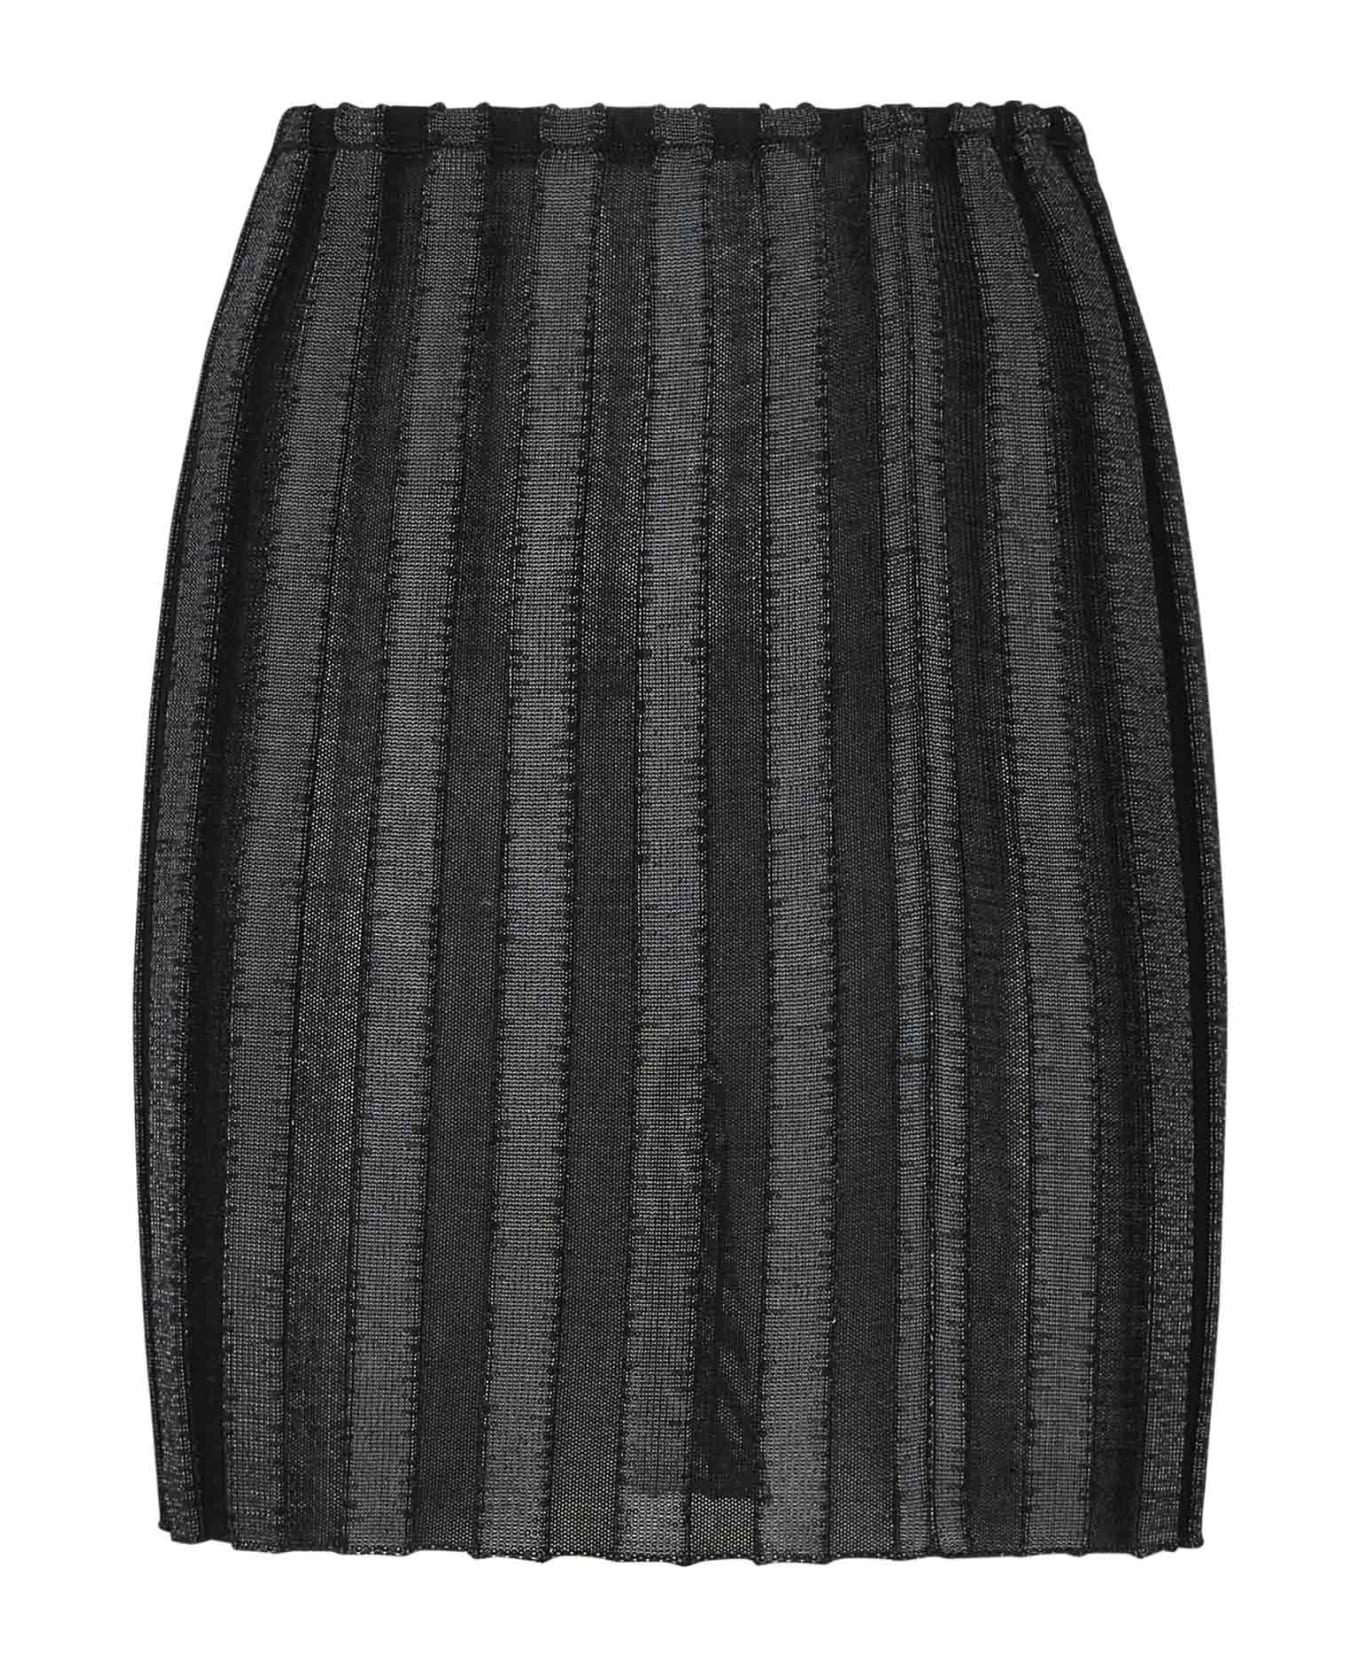 A. Roege Hove Skirt - Black